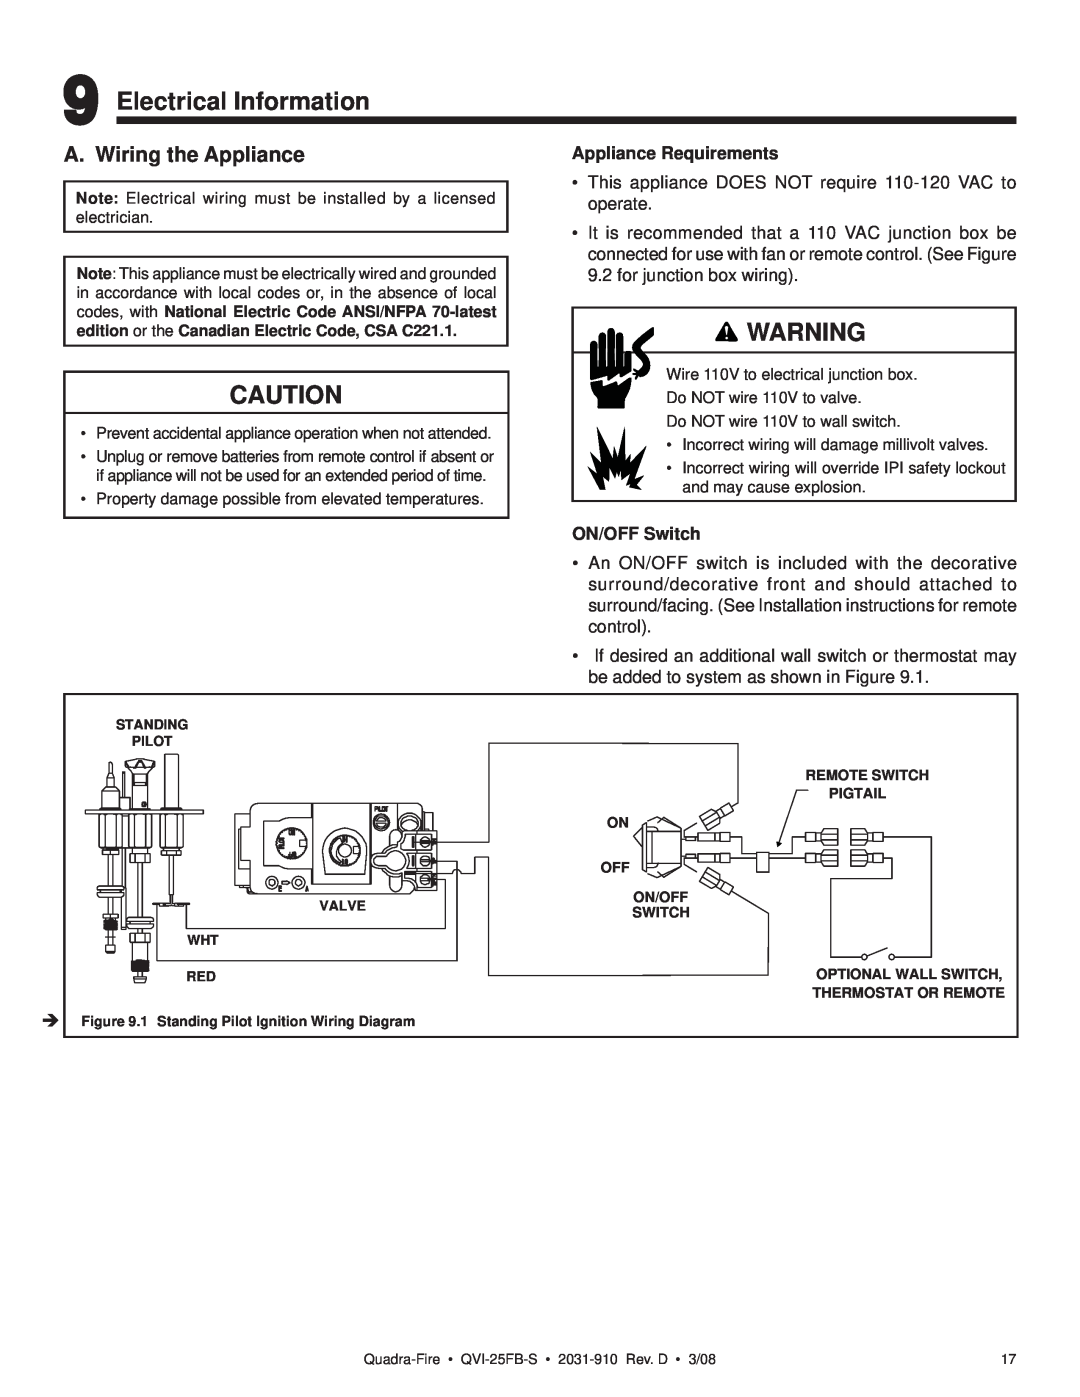 Quadra-Fire QVI-25FB-S owner manual Electrical Information, A. Wiring the Appliance 